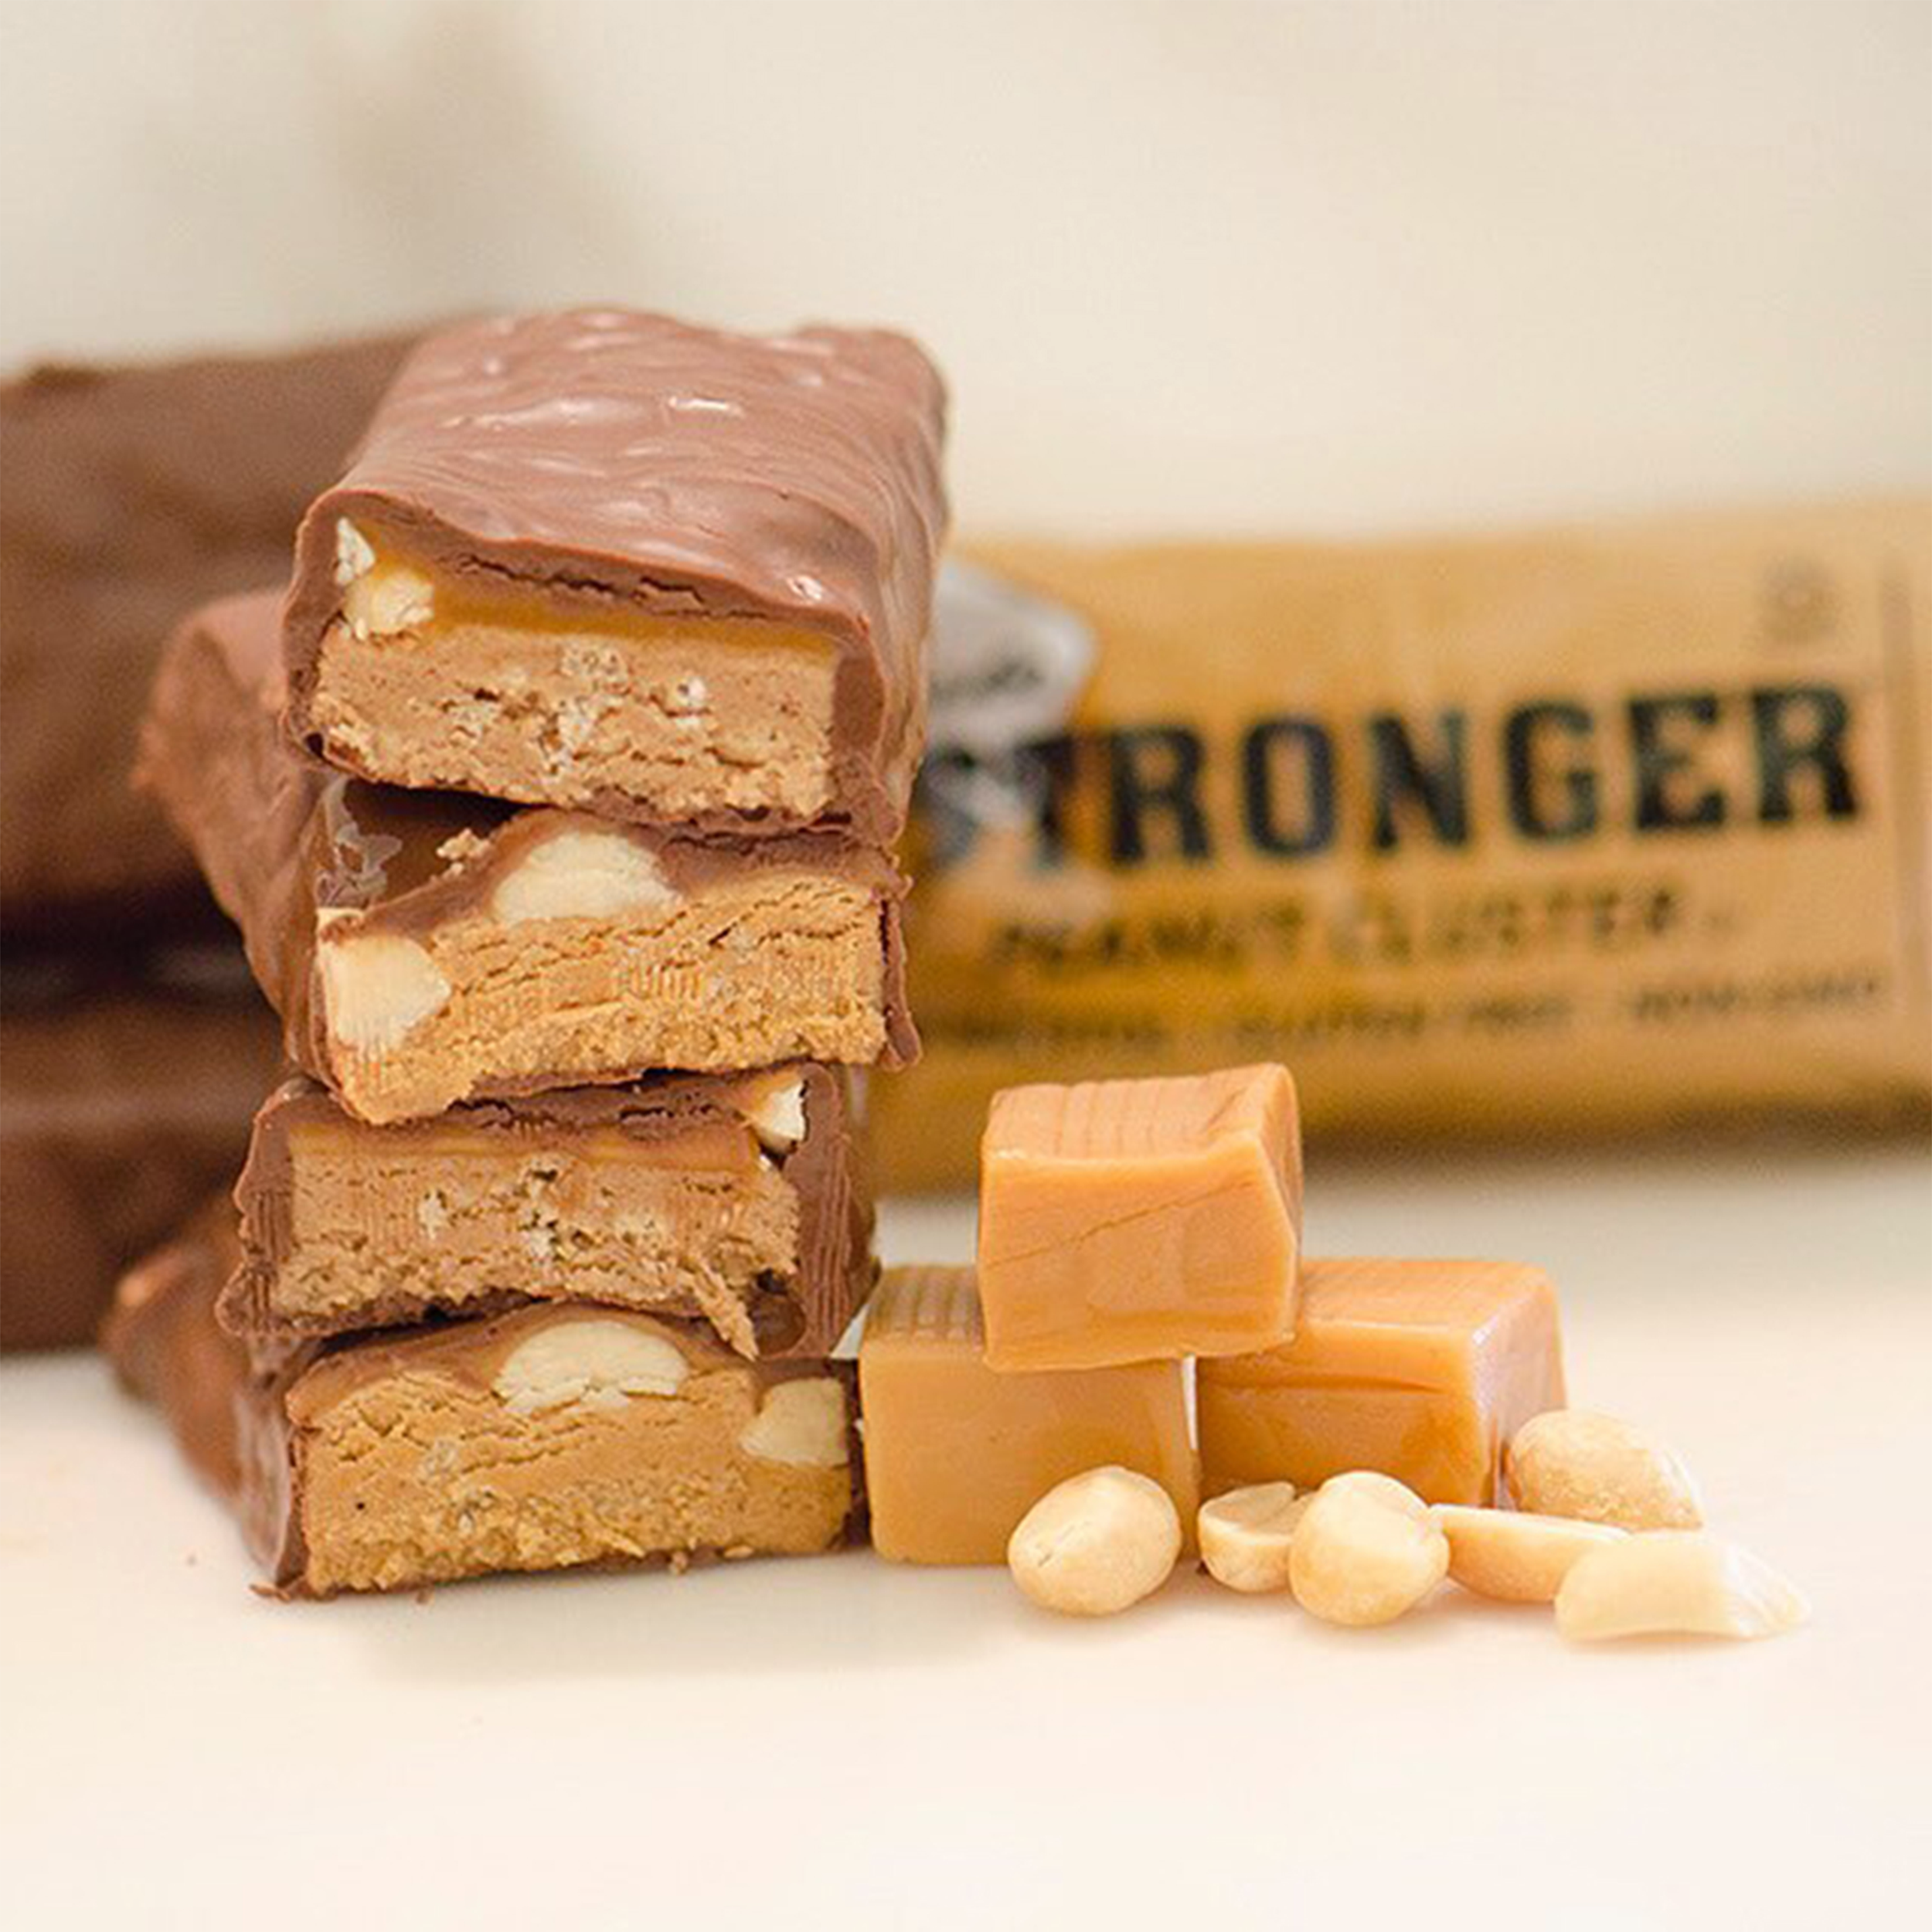 NuGo Stronger Peanut Cluster stacked next to caramel squares in front of wrapper